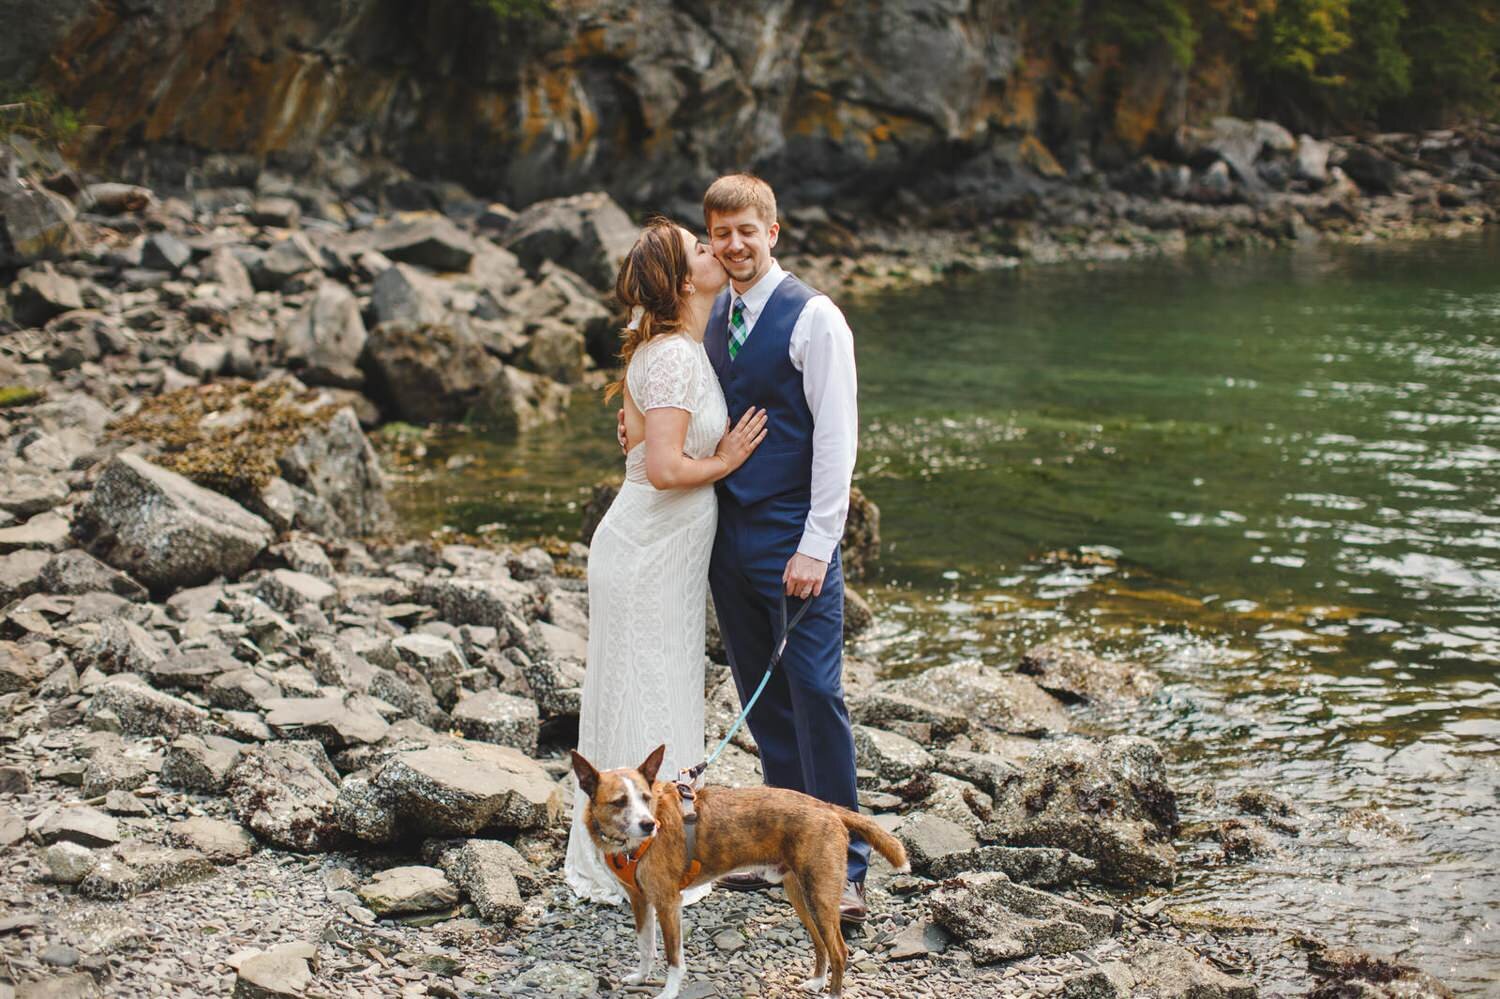  bride kisses groom on the cheek in an art deco mid century wedding dress. Groom in blue vest and tie, holding dogs leash on a rocky beach 